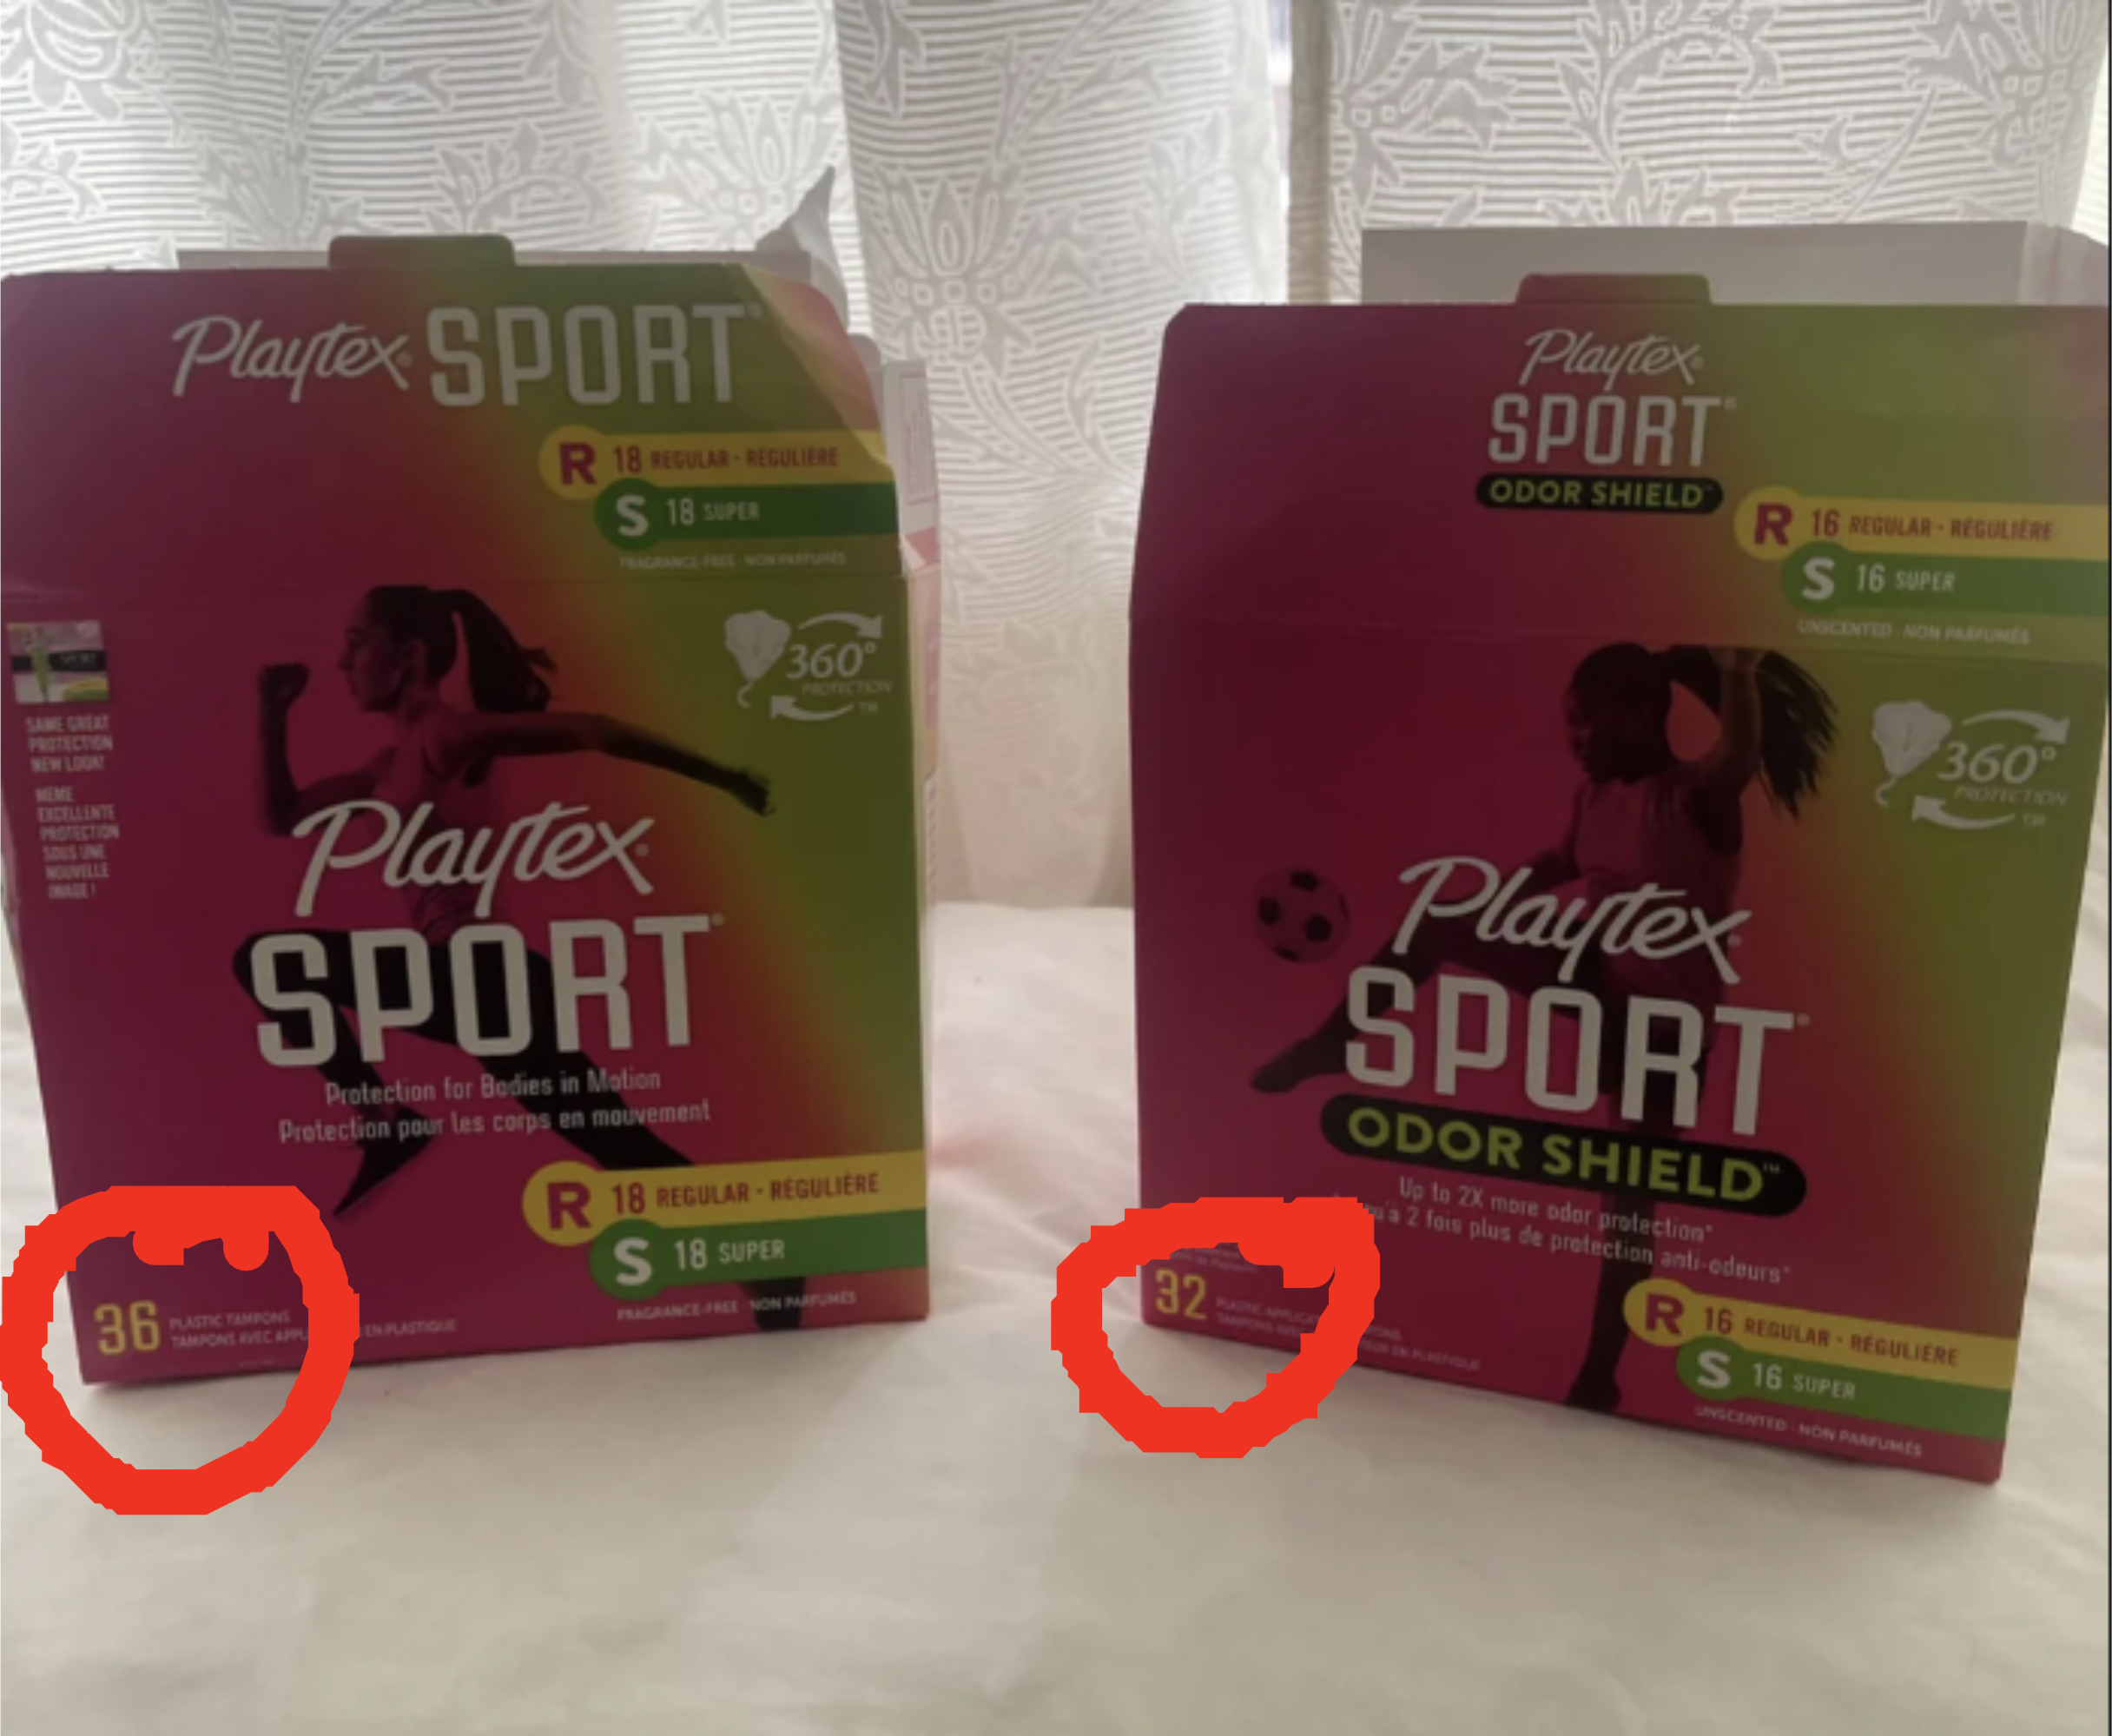 Boxes of Playtex Sport tampons highlighting &#x27;360&#x27; design and &#x27;Odor Shield&#x27; feature, in a multipack of 36 and 32 counts